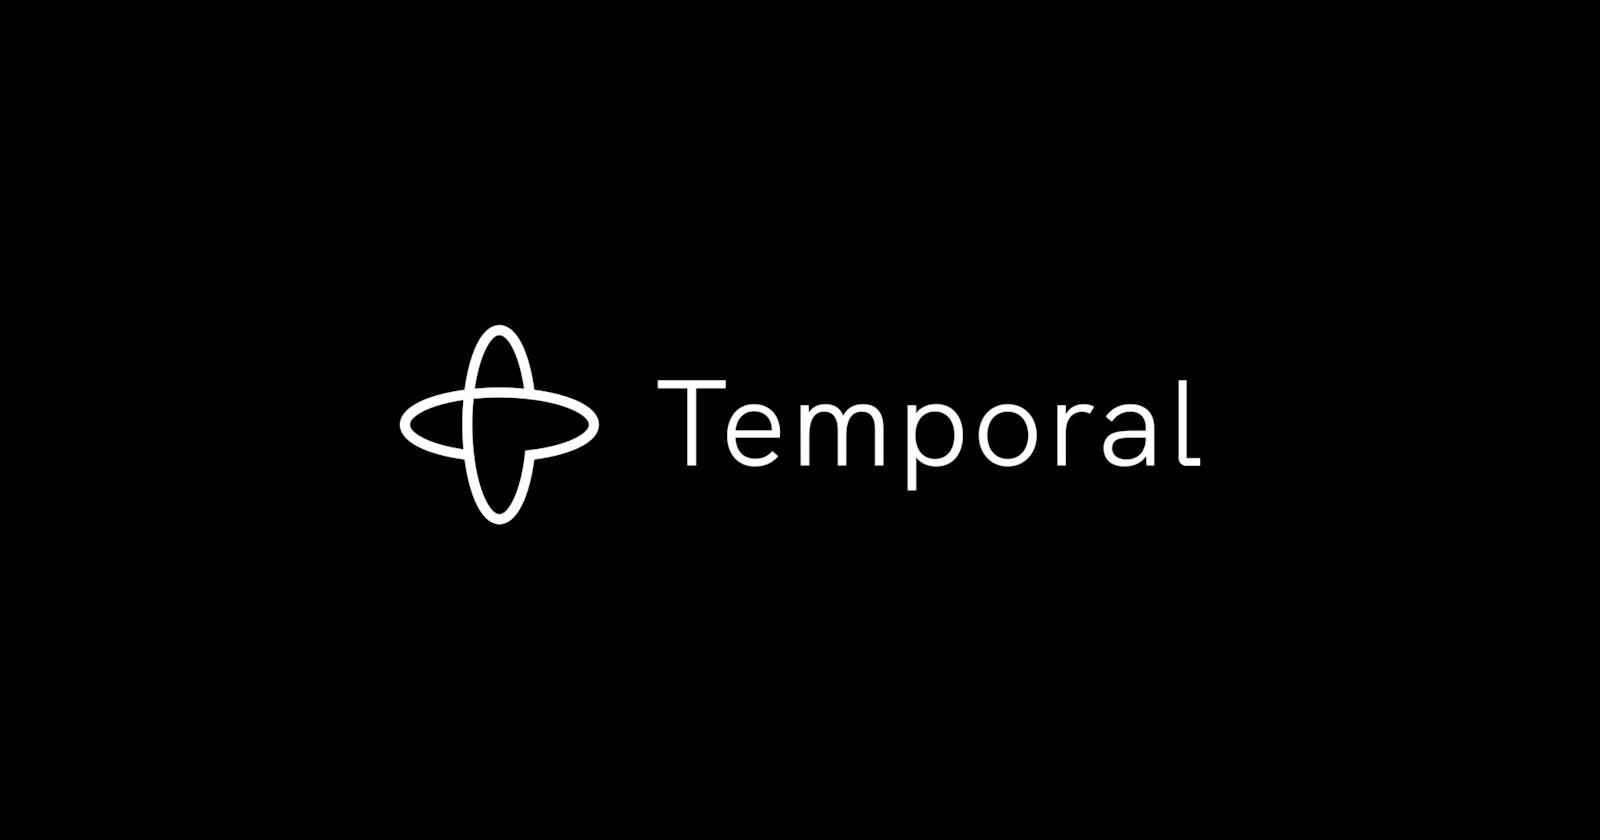 Hello World with Temporal